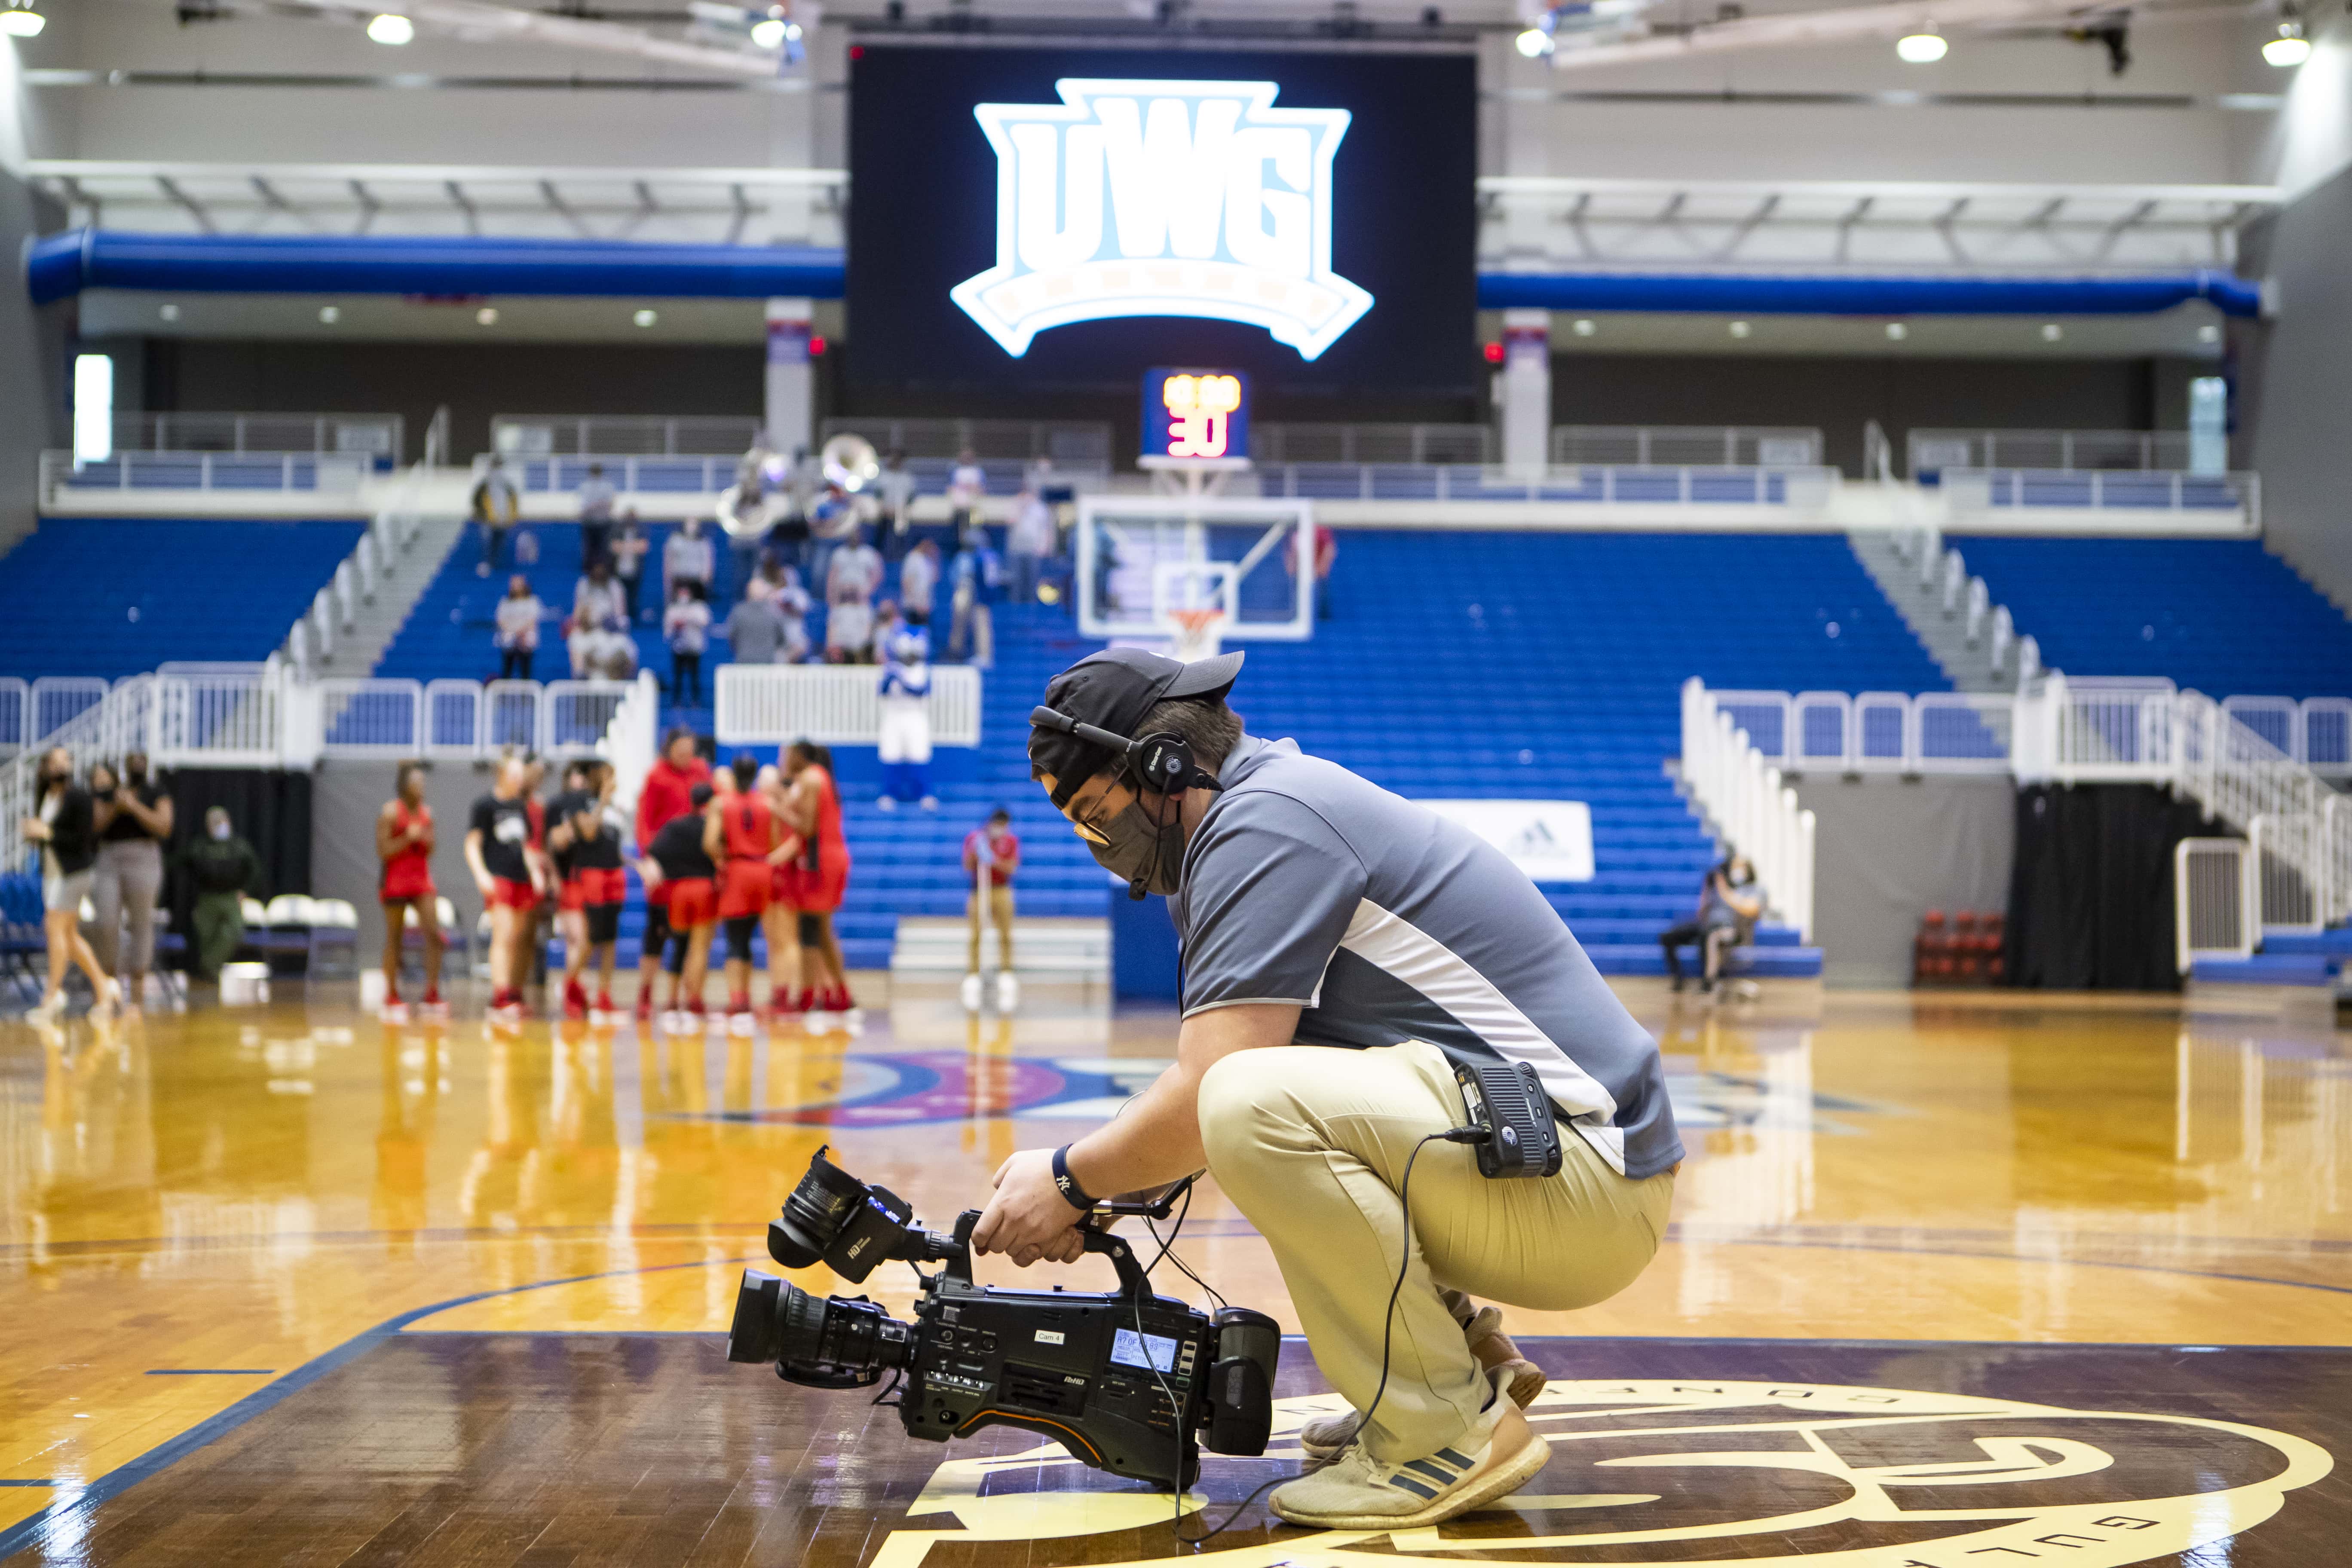 Camera man standing in a squat with a camera on the basketball field.